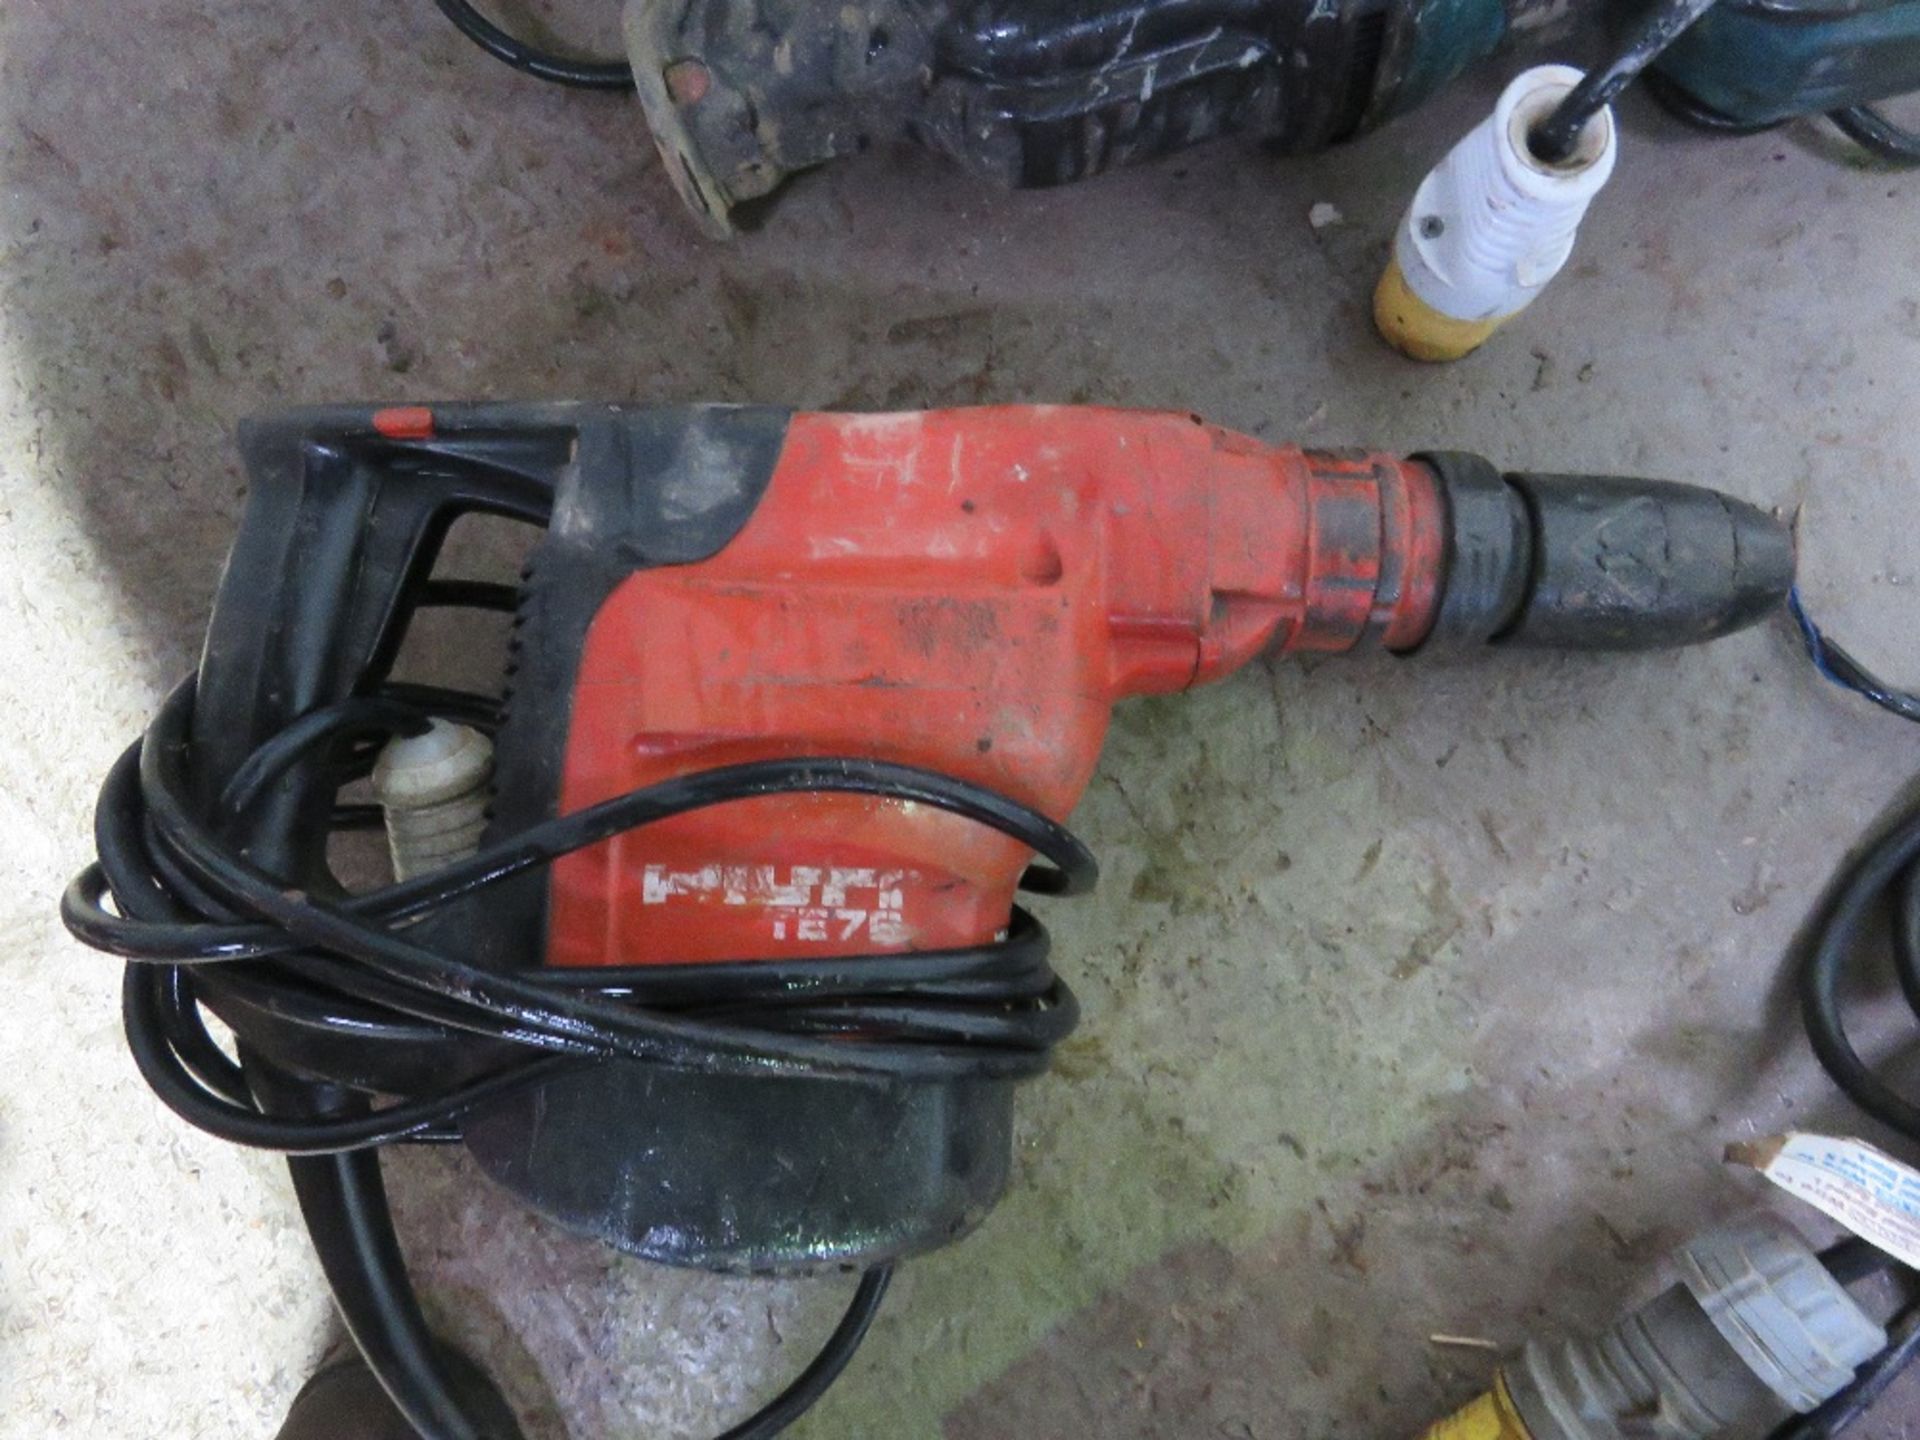 HILTI TE76 BREAKER DRILL PLUS A MAKITA RECIP SAW, 110VOLT. THIS LOT IS SOLD UNDER THE AUCTIONEERS - Image 2 of 3